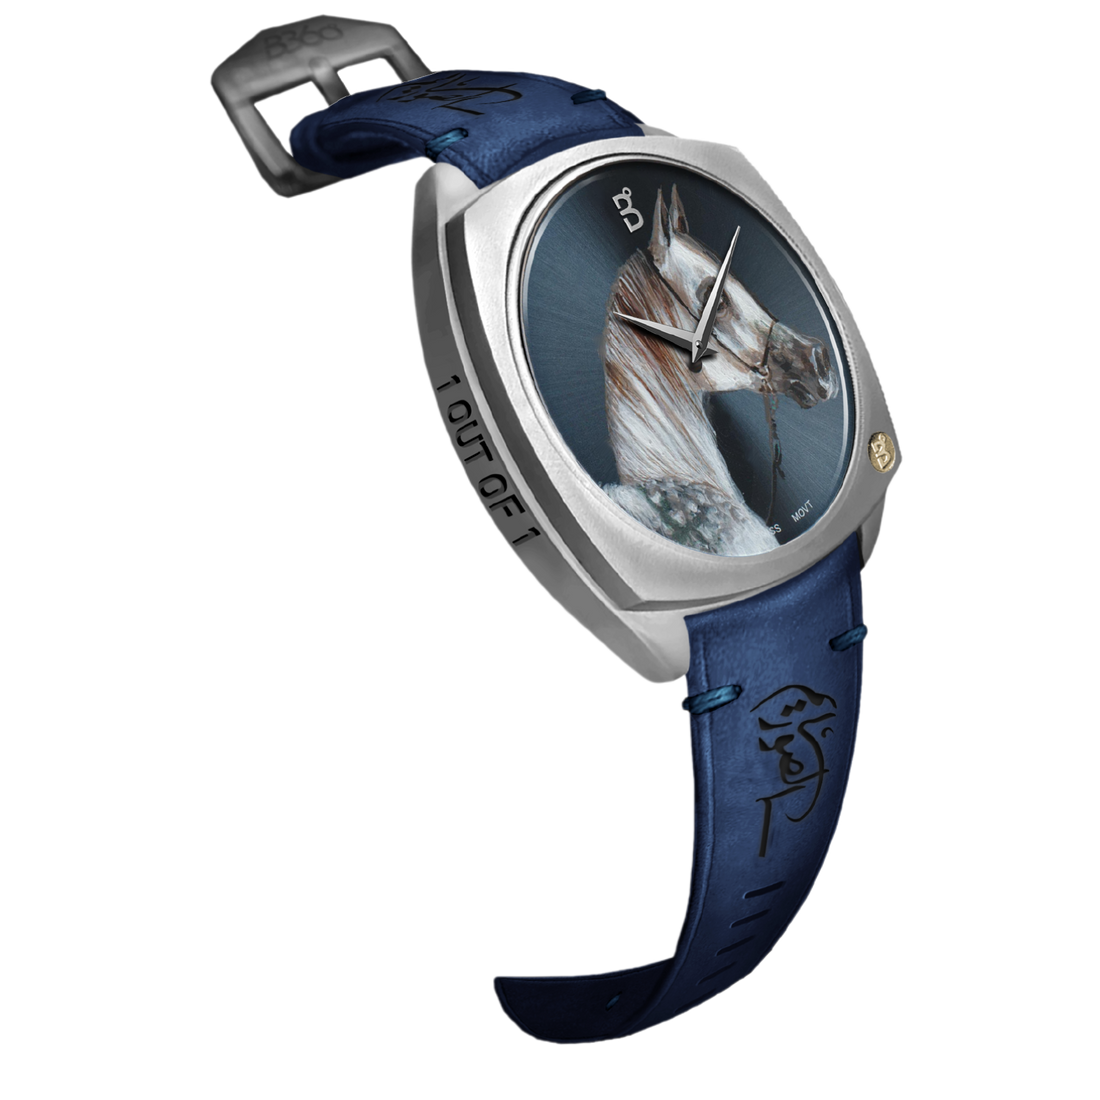 B360-Watches- B360 WATCH-We have created over 70 hand-painted watches, one for each horse. Each watch comes with a signed certificate by our artists and is marked as 1 out of 1. Check out our Arabian Horses collections.  